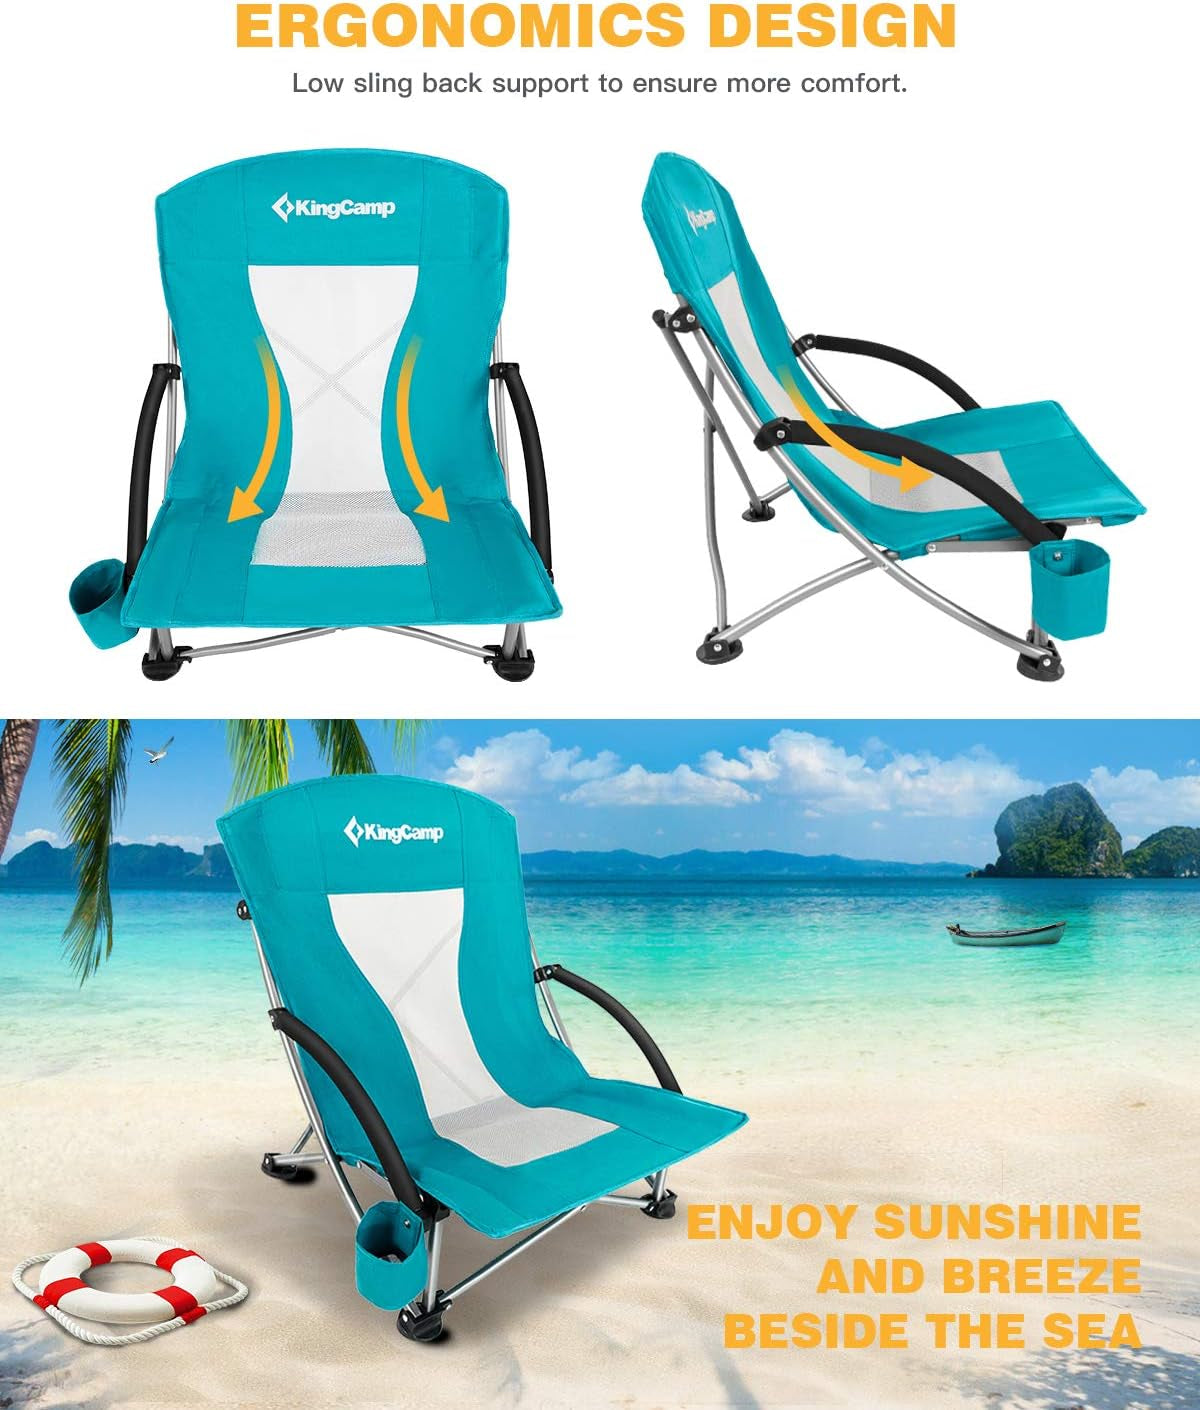 Low Folding Beach Chairs for Adults,Portable Lightweight Lowback Sling Chair with Headrest,Cup Holder,Carry Bag Armrest,Foldable Chair for Sand Camping Concert Travel,300Lbs